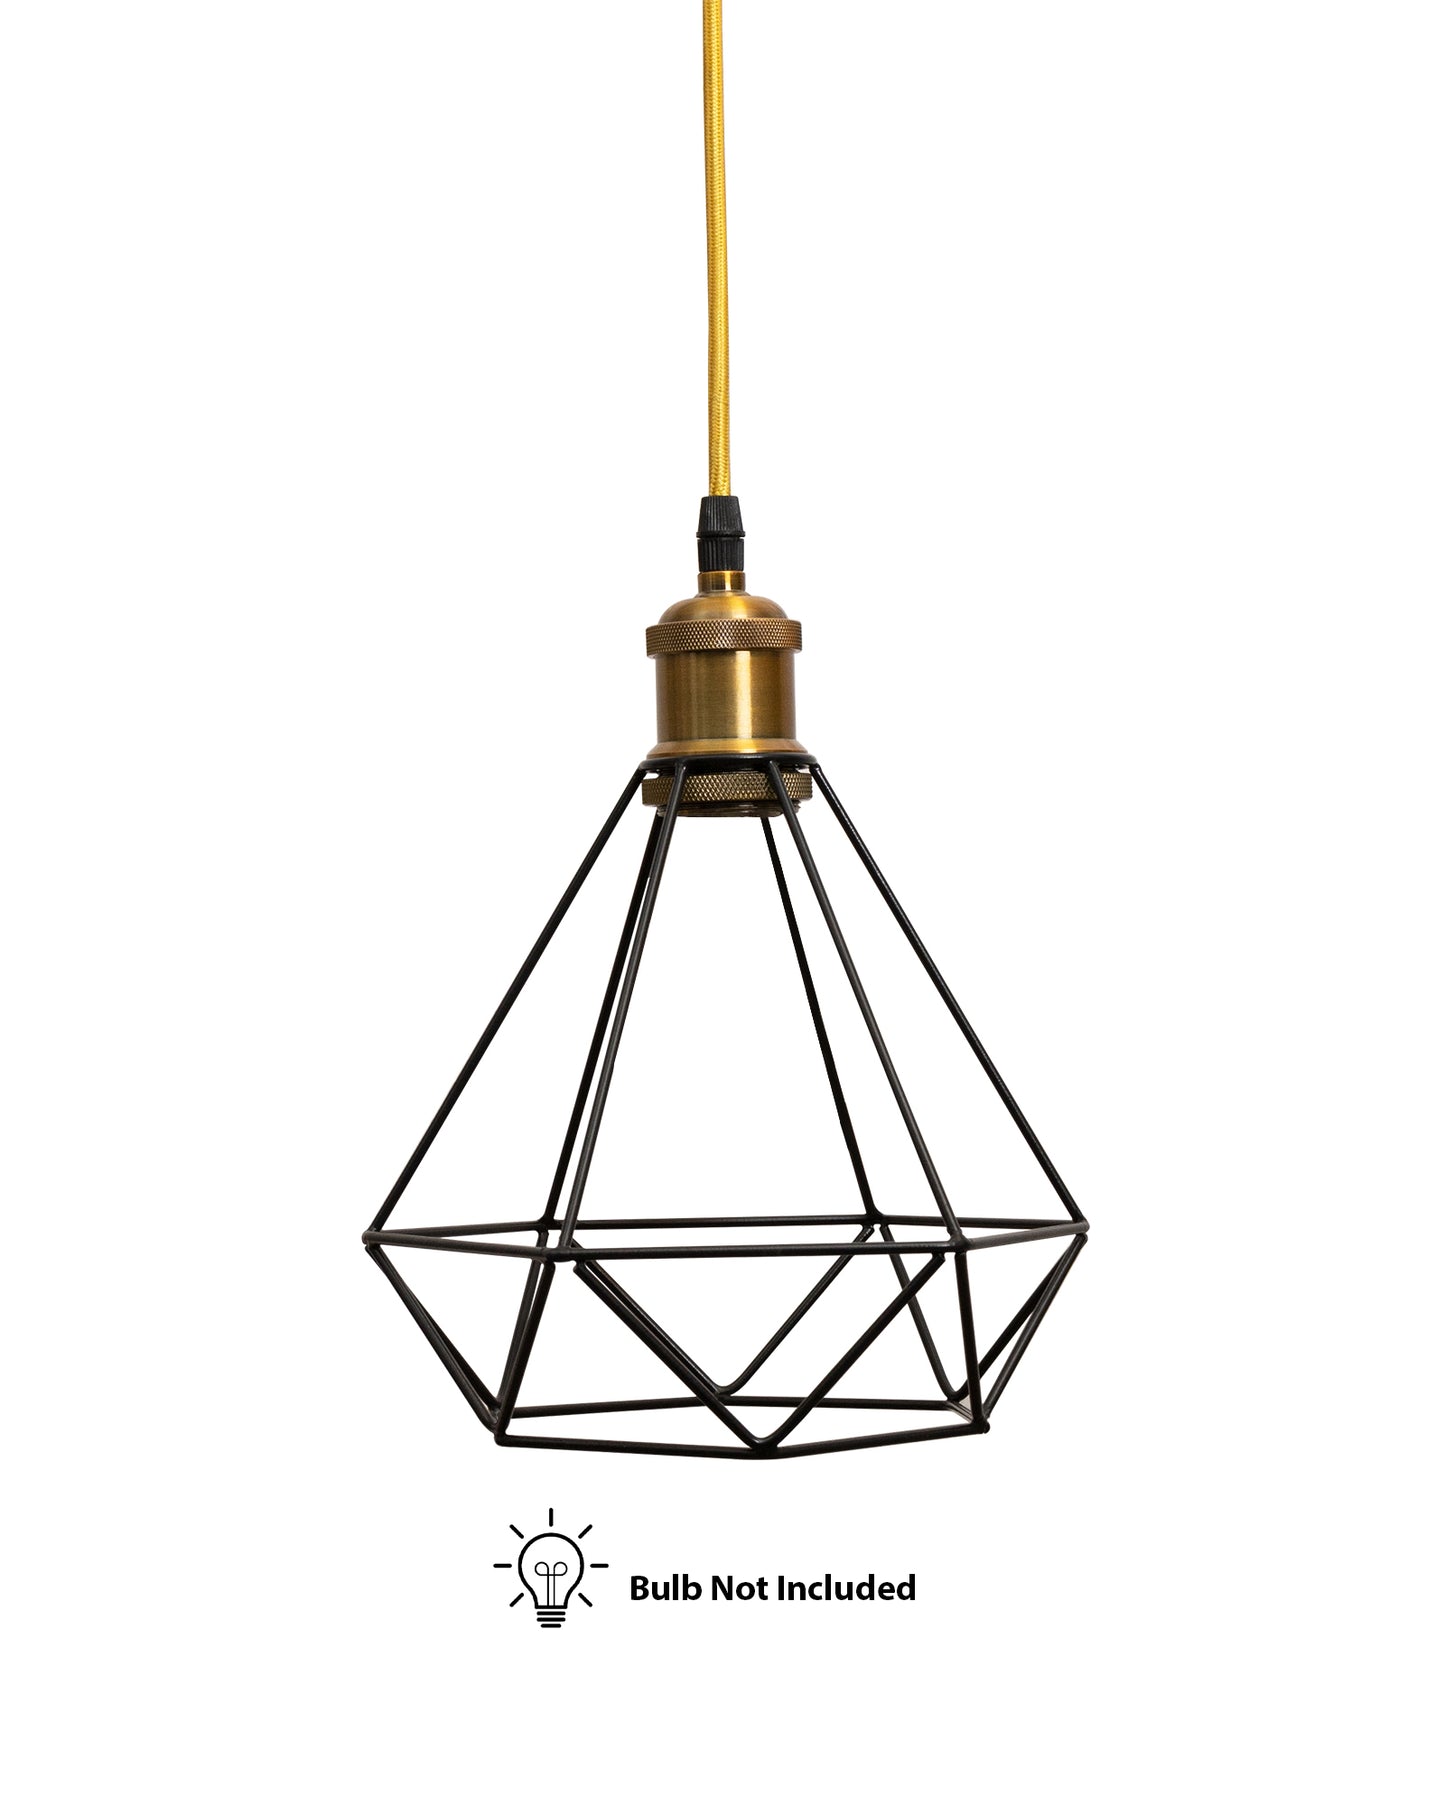 Lighting Black Metal Cage Lampshade for Pendant Light With Holder Hanging Lighting Cord Fixture Farmhouse Bedroom Dining Room Decoration